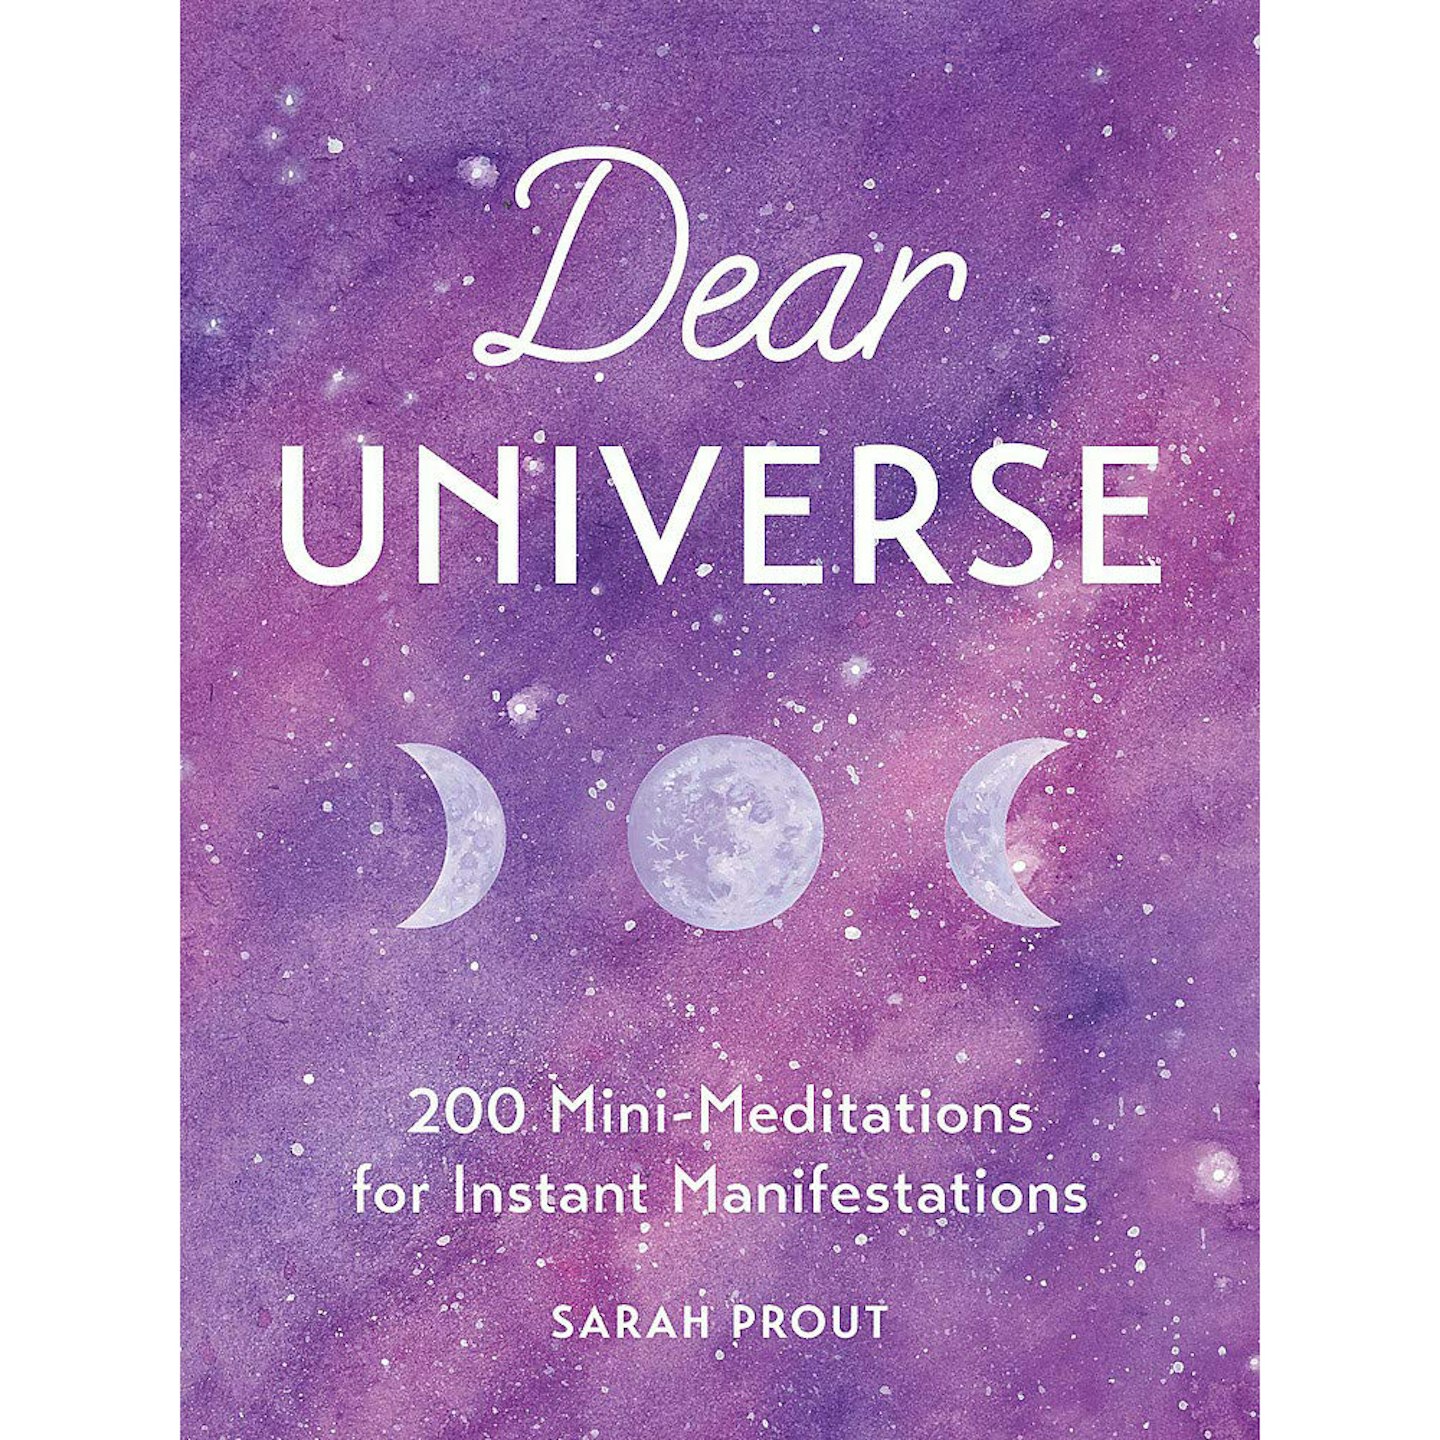 Dear Universe: 200 Mini Meditations for Instant Manifestations by Sarah Prout